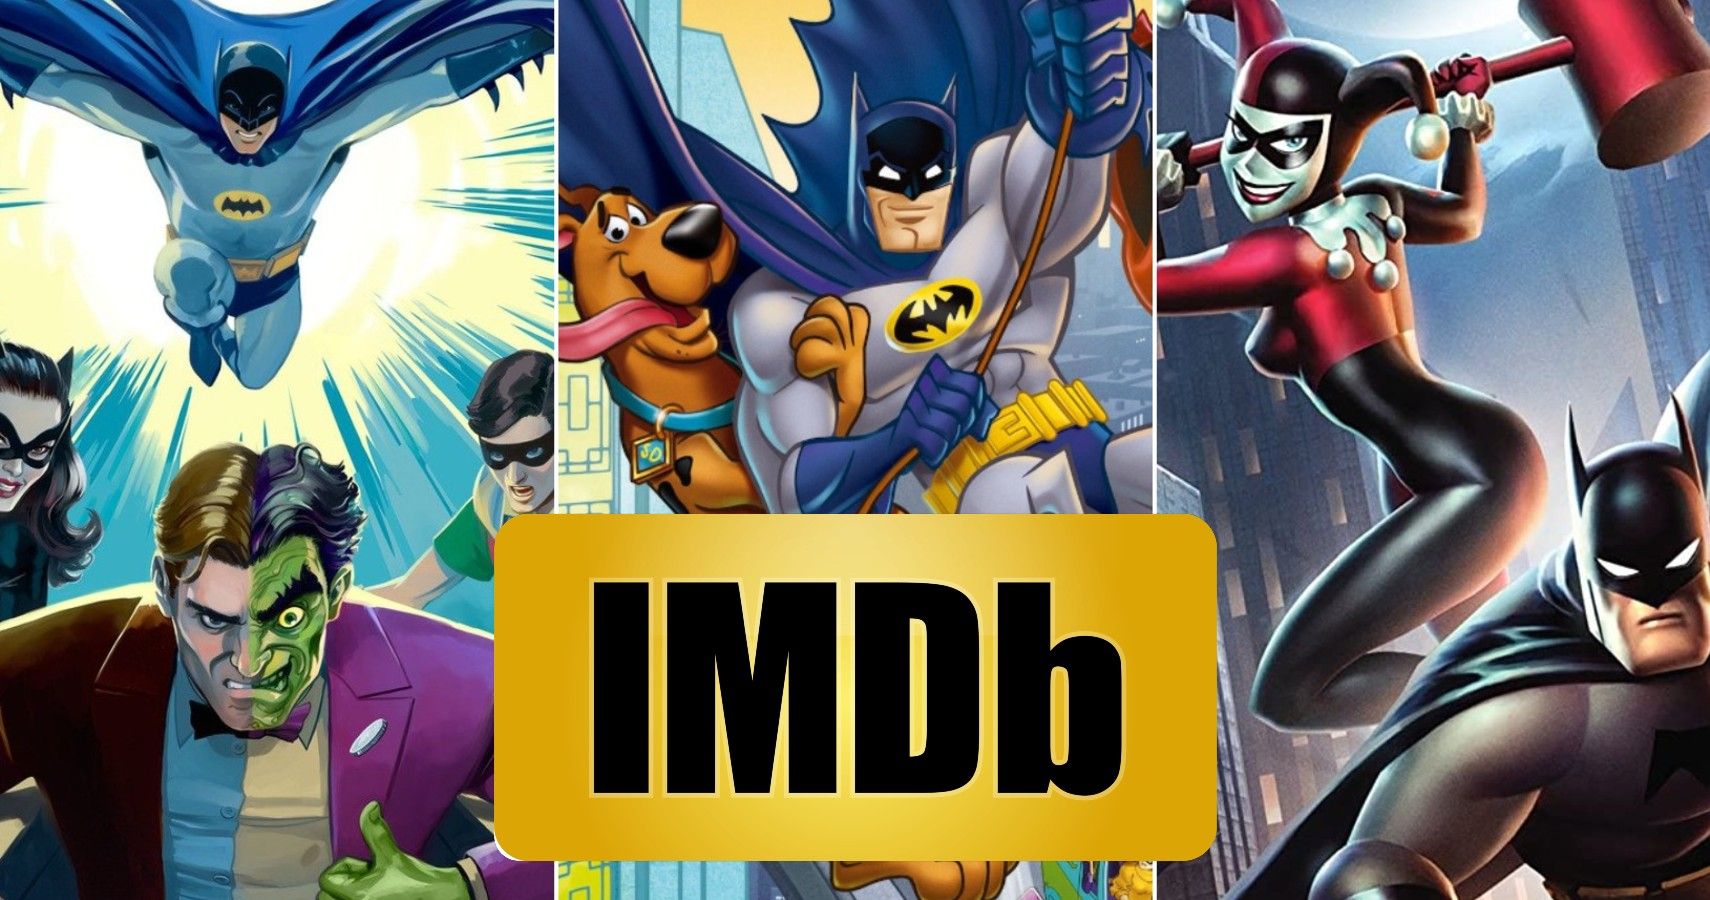 The 10 Lowest-Rated Batman Animated Movies (According To IMDb)